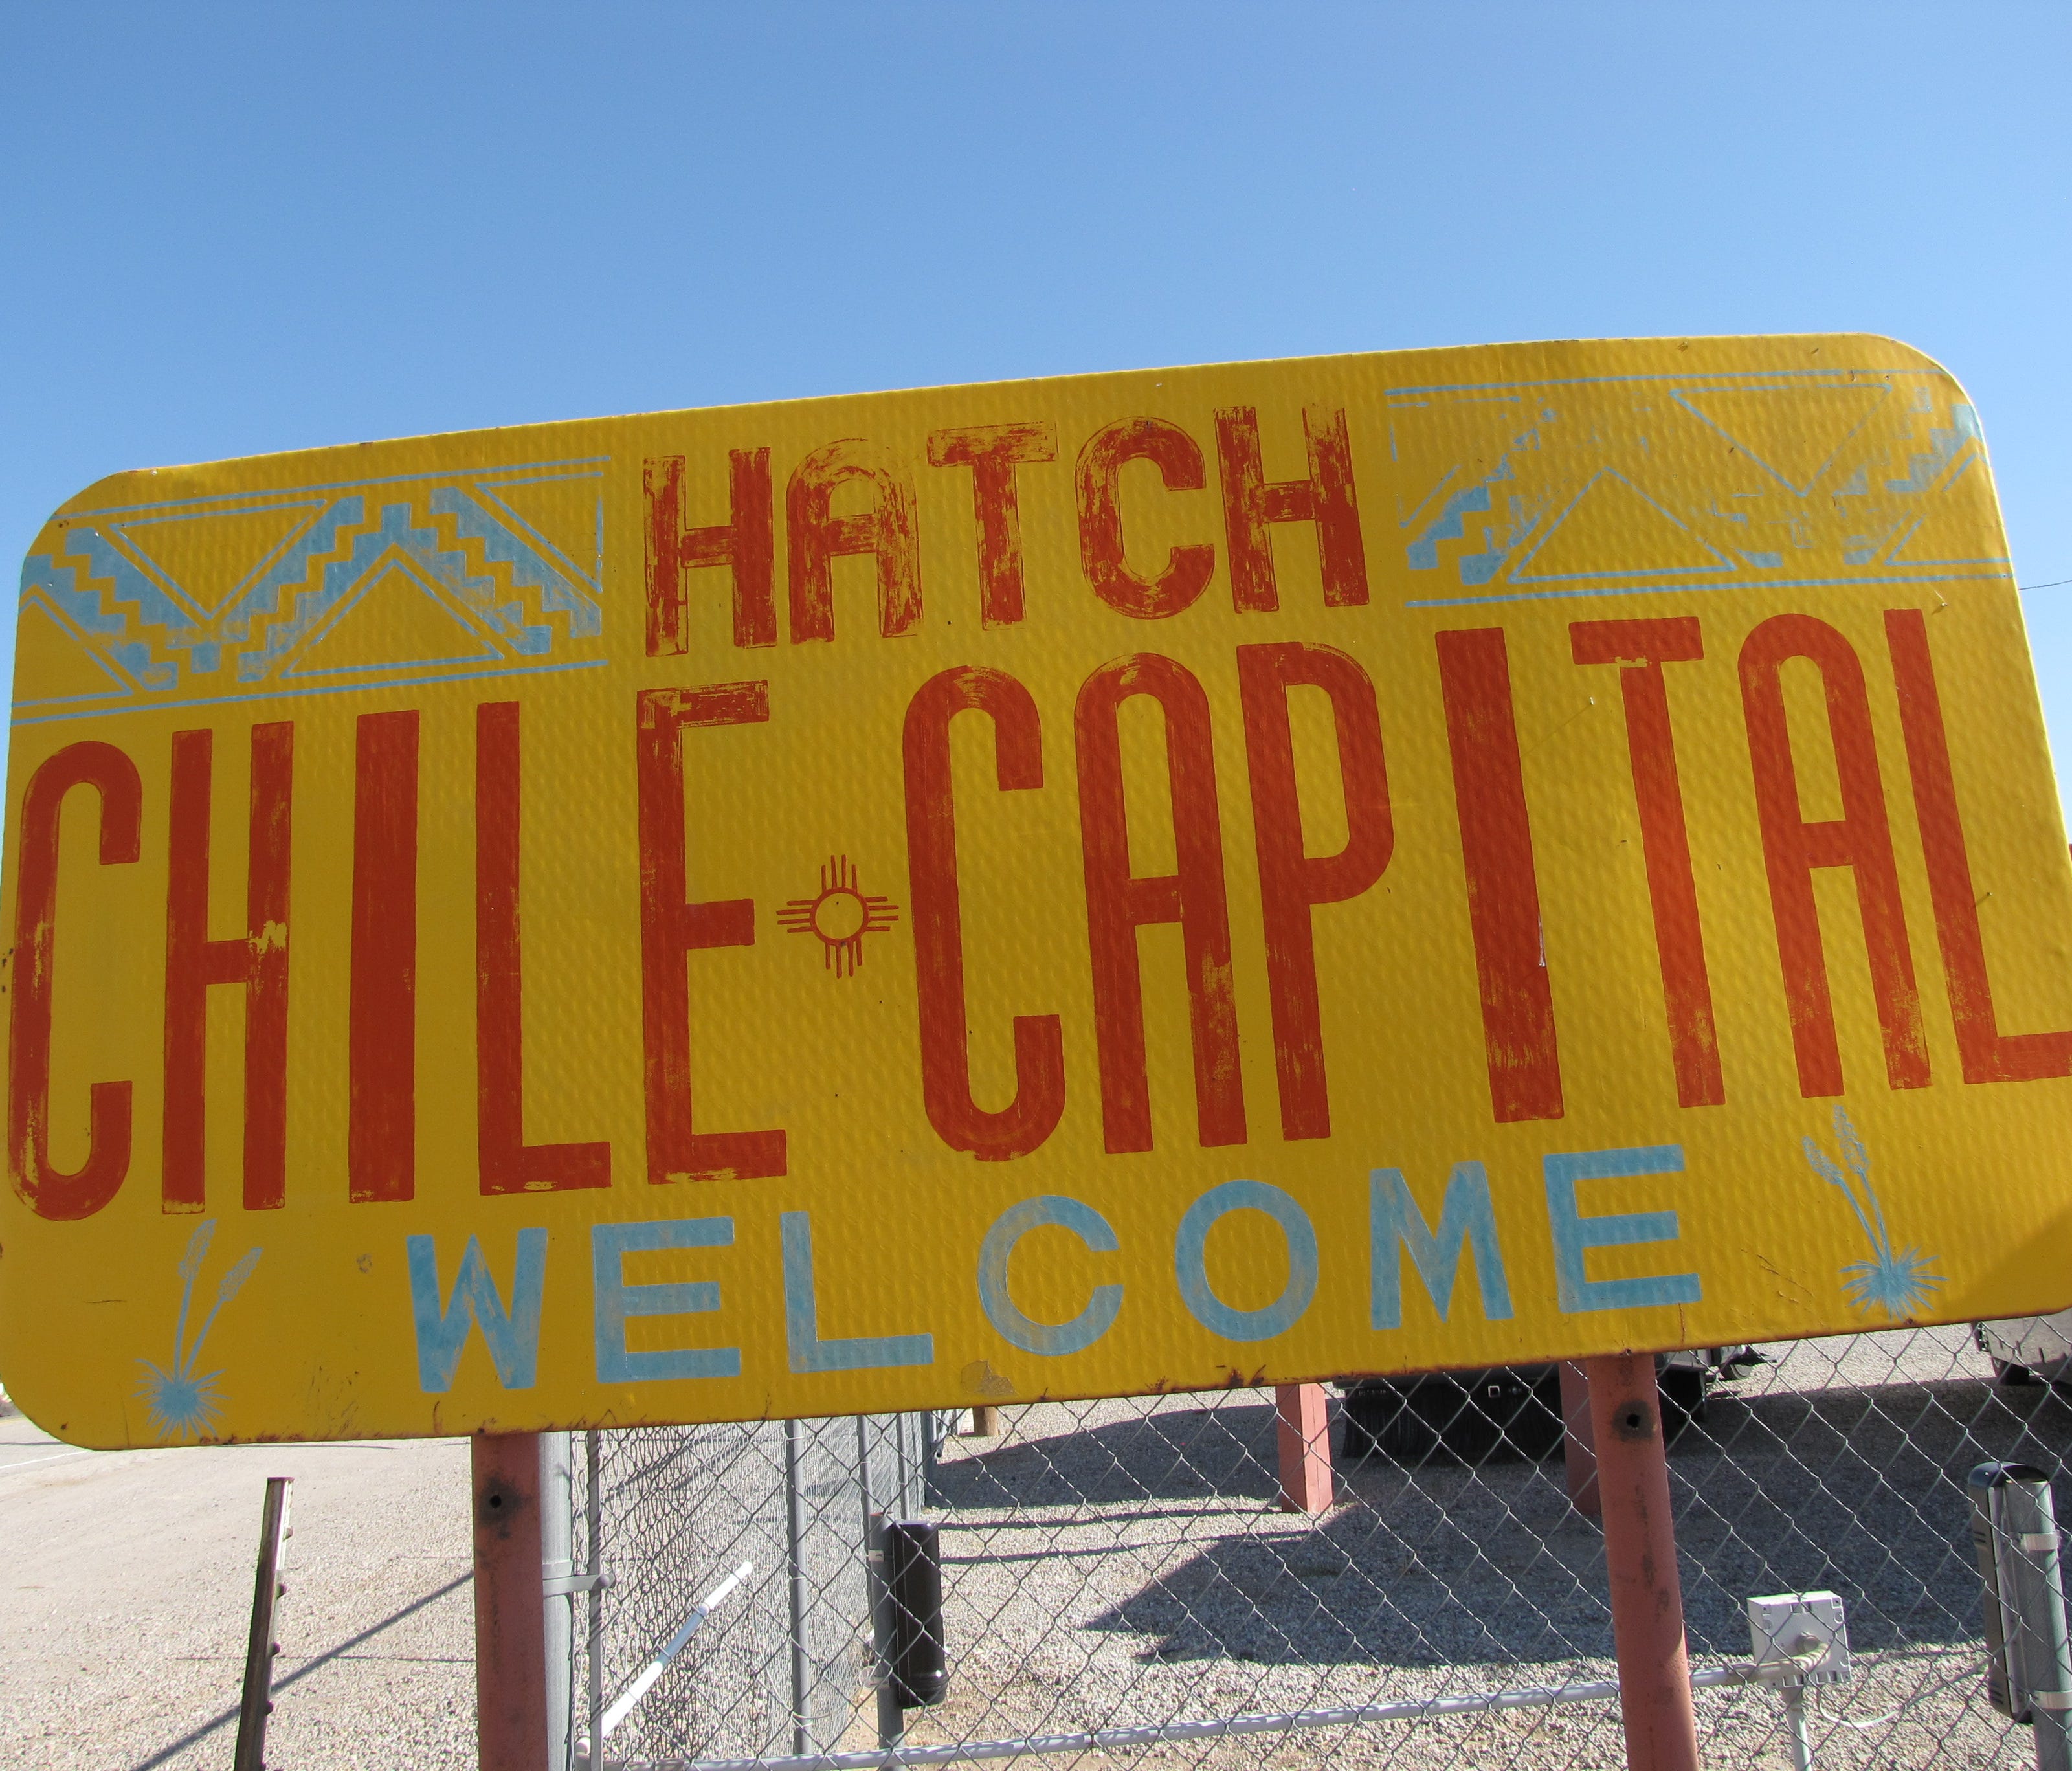 The Chile Capital of the World, Hatch, N.M., produces an abundance of New Mexican green chile, which is generically referred to as Hatch chile. Try it at the Hatch Chile Festival in September.